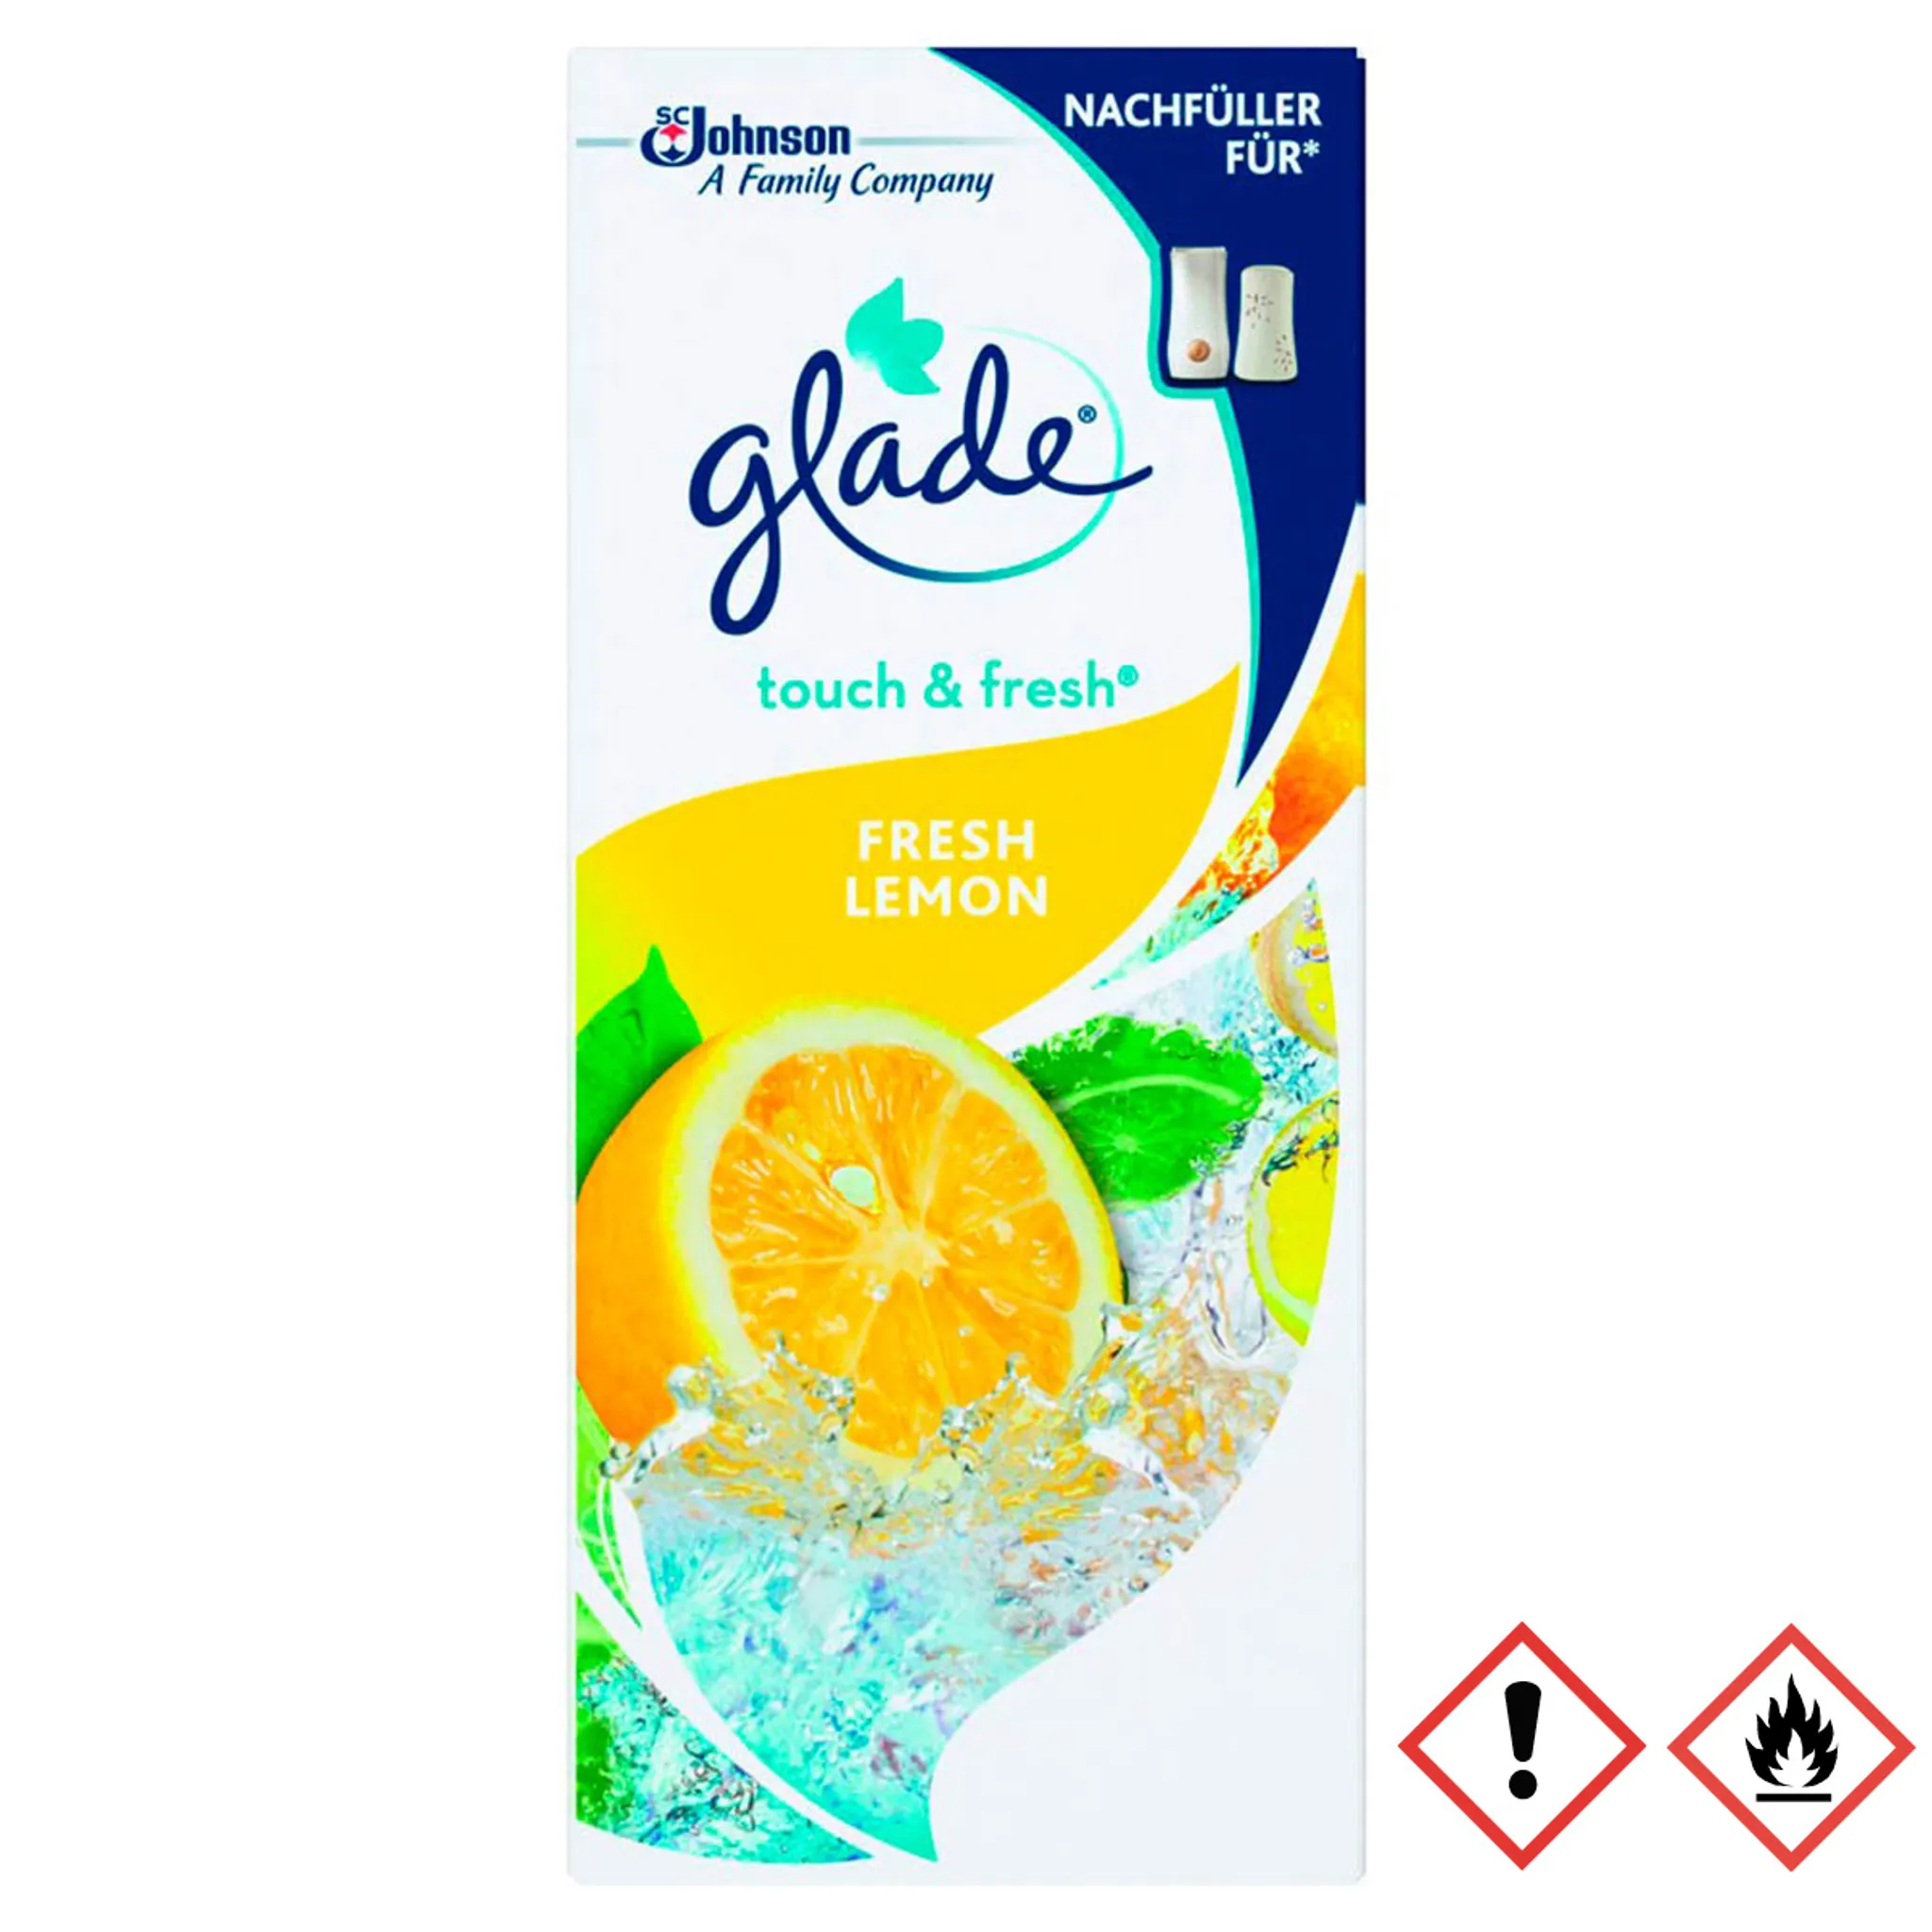 Glade Brise One Touch Fresh Lemon touch and